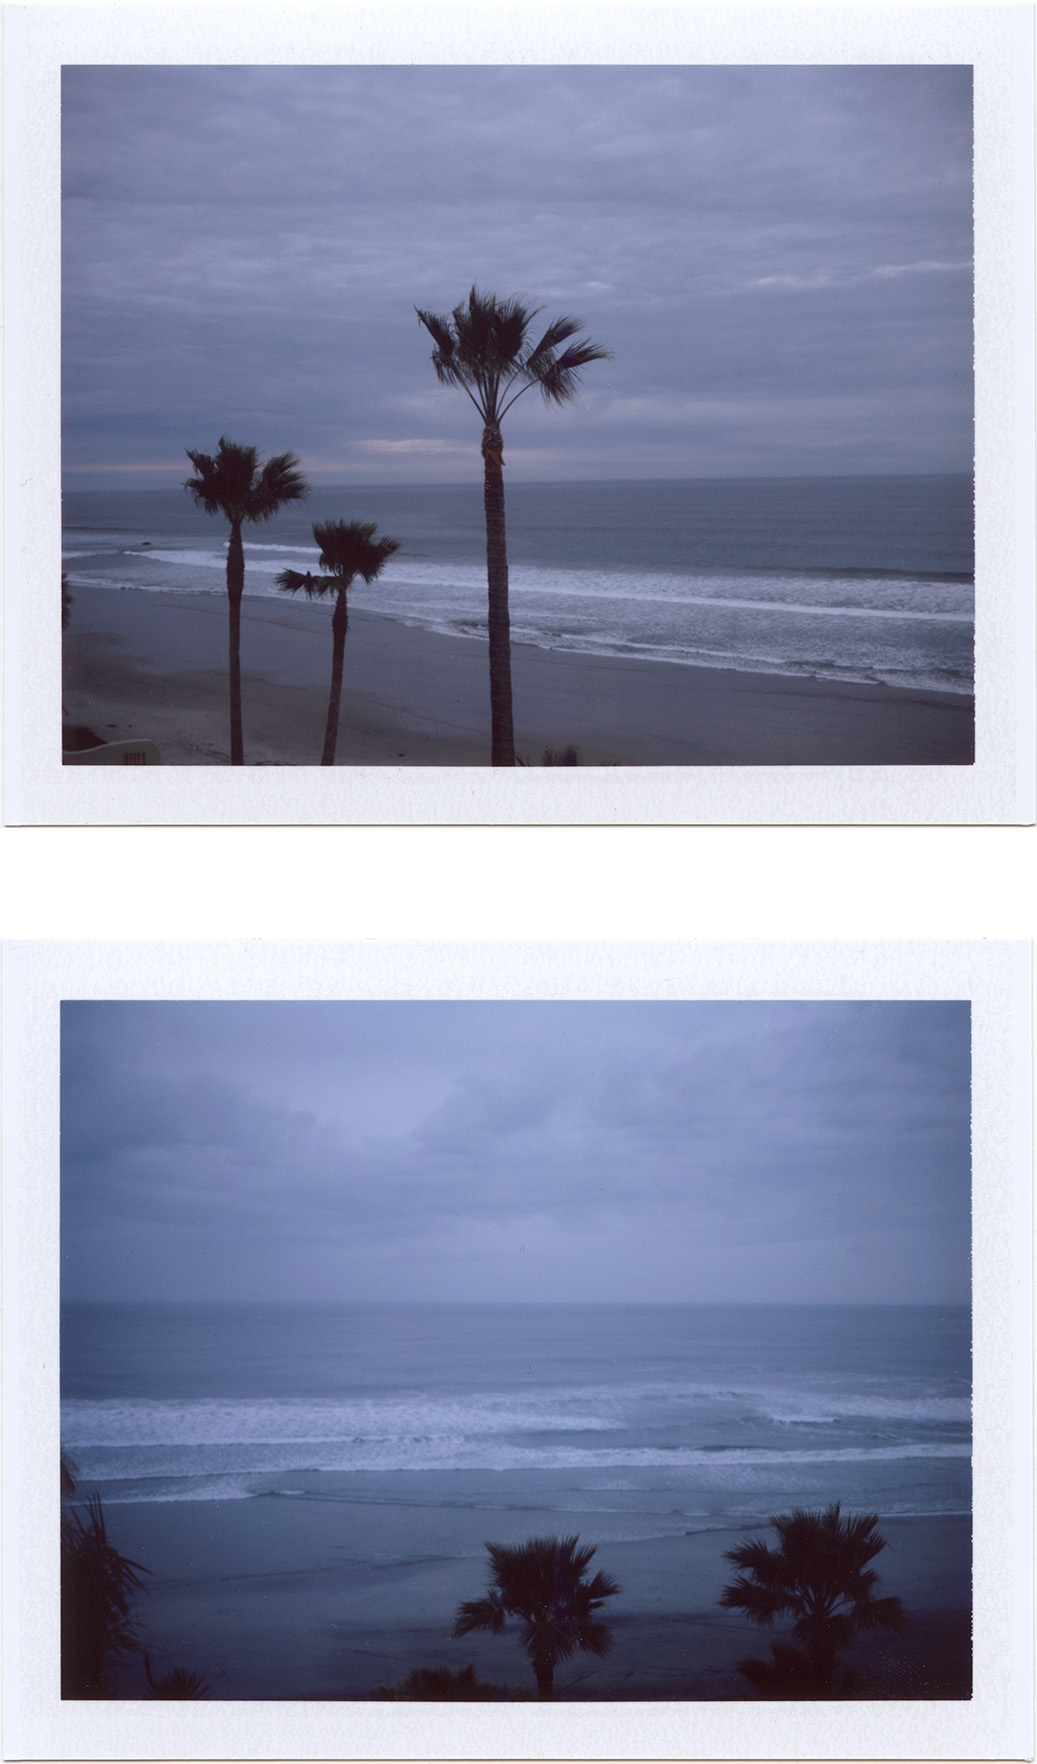  La Mision. Baja California, Mexico / 2013   Excerpts from the book  "Fragments"    Signed Copies   On Demand @Blurb   Online Shop  